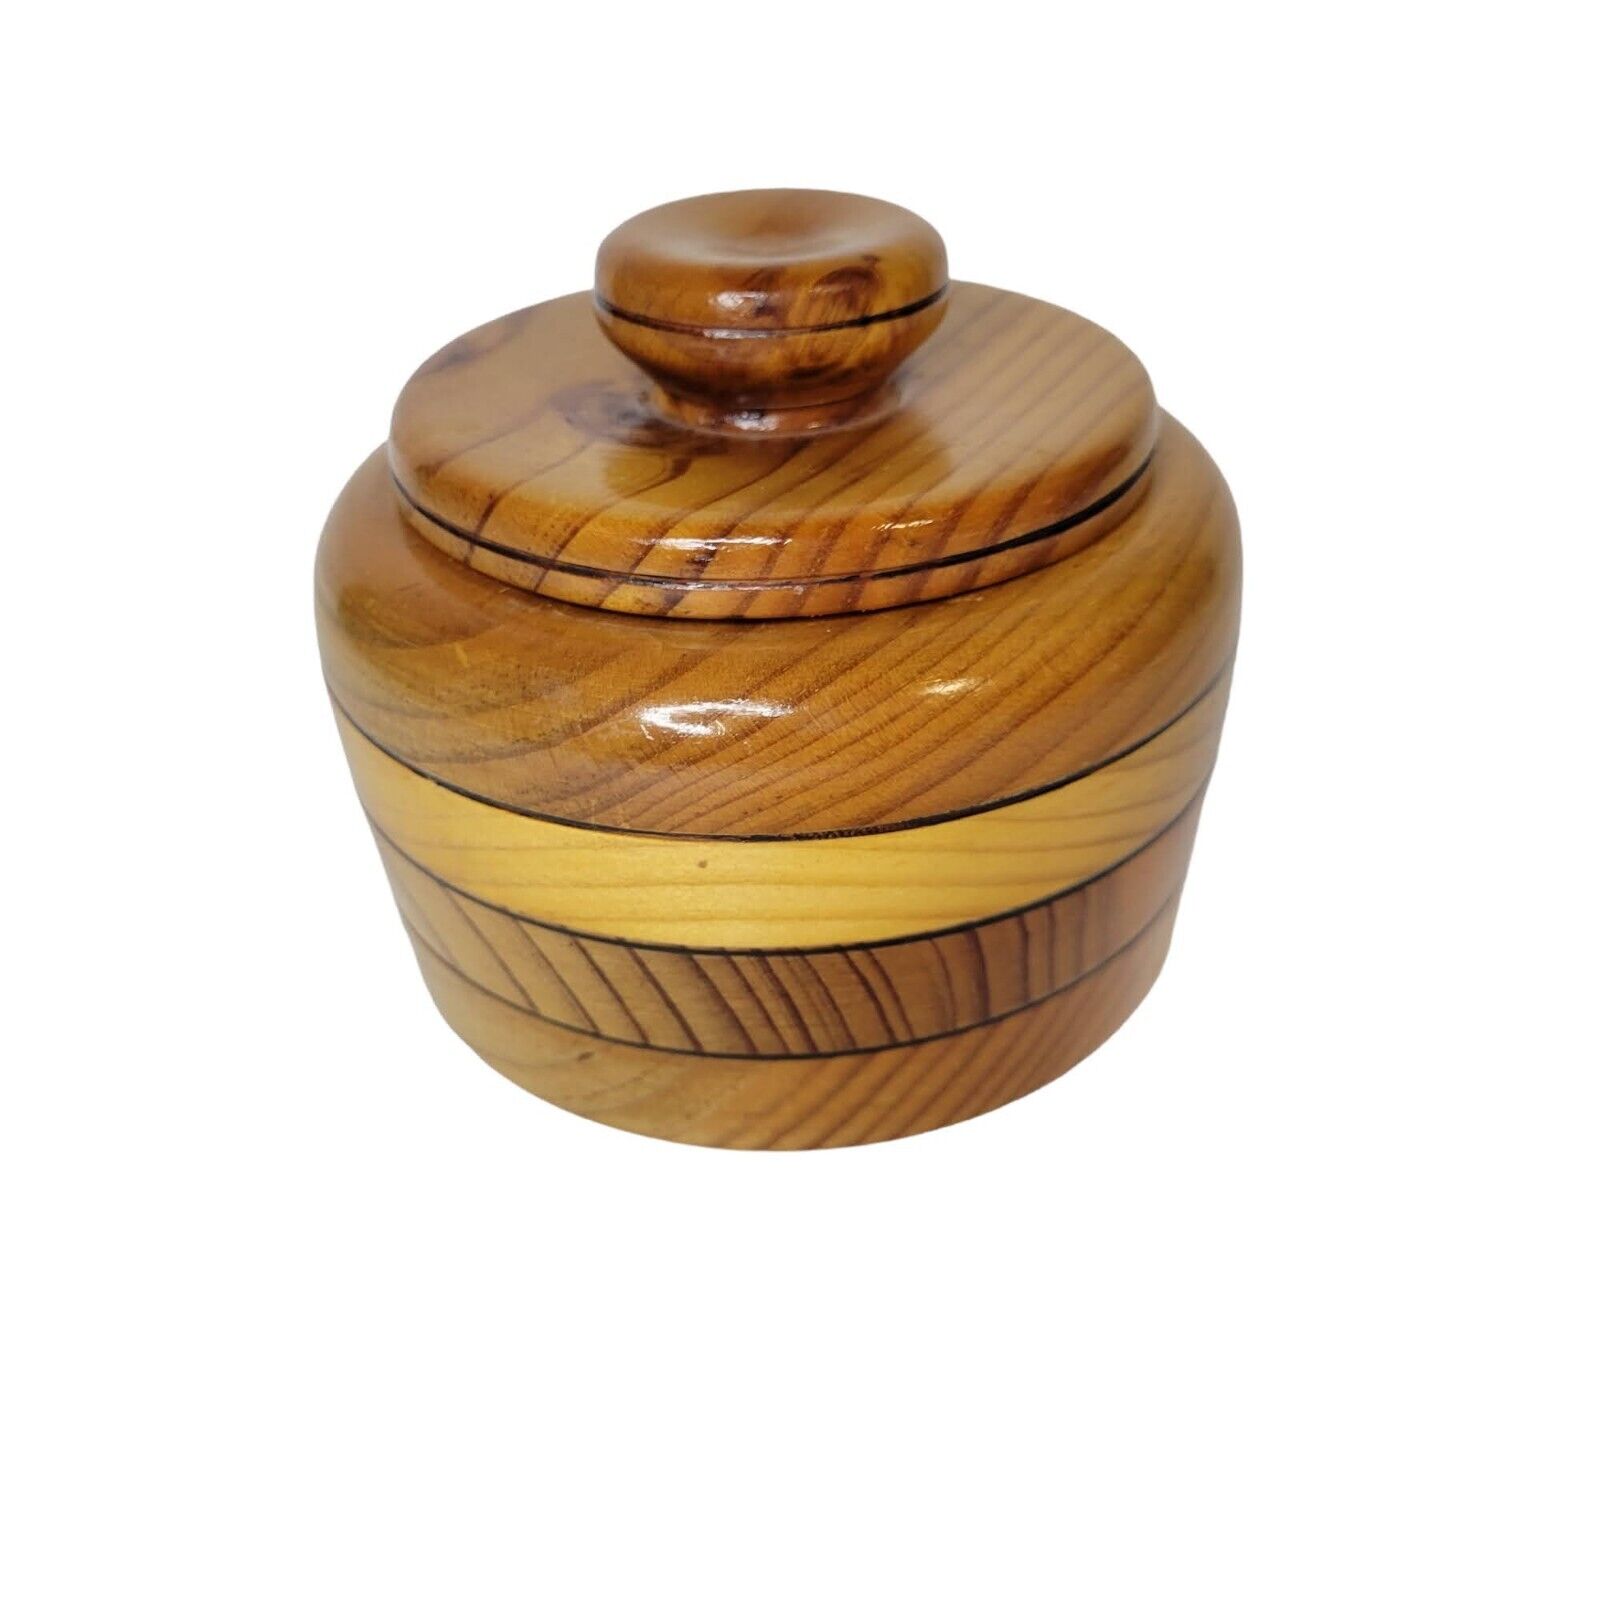 Beautiful Wooden Bowl with Lid Handcrafted